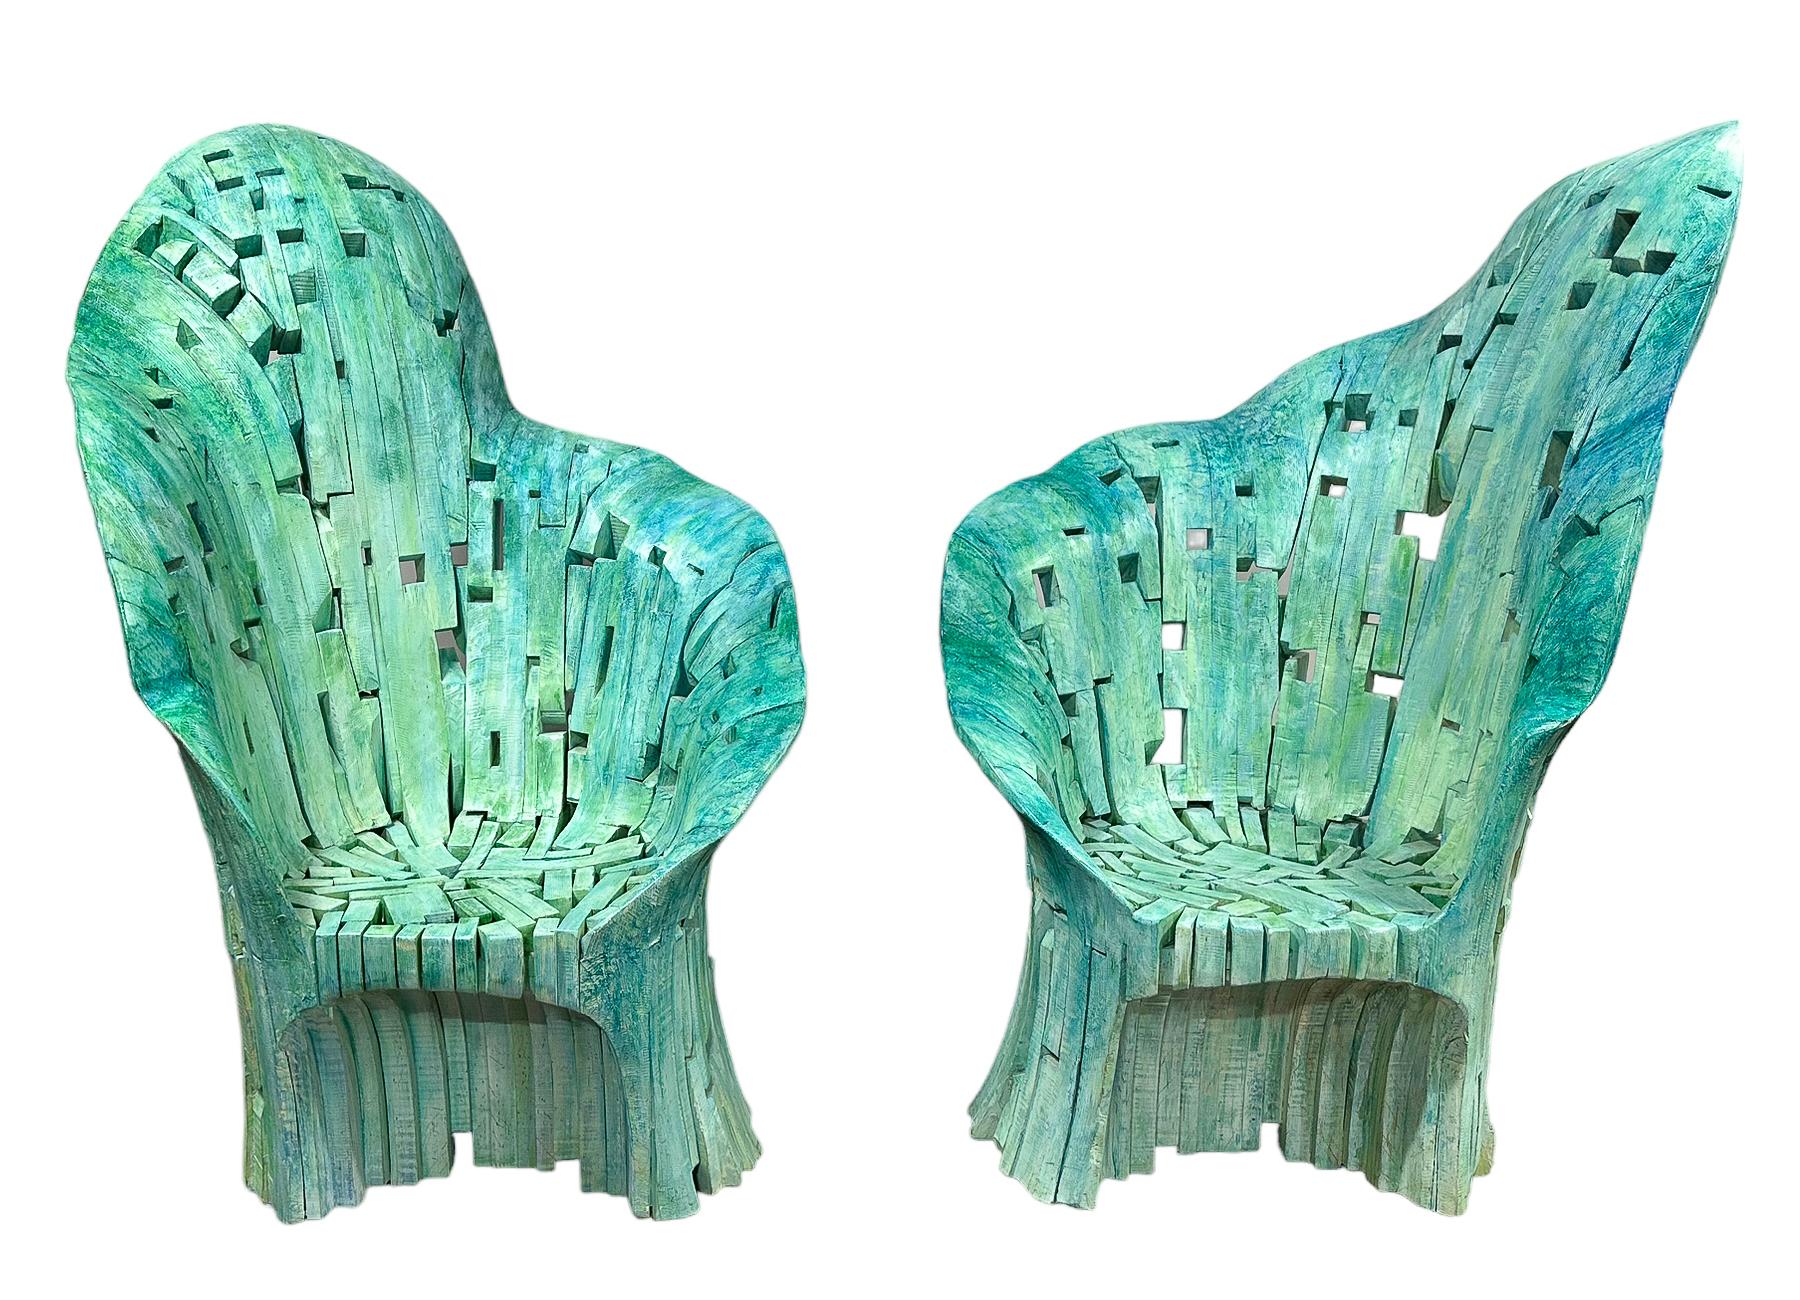 Whimsical and fun Yves Boucard high back chairs. Dramatic freeform chairs are constructed of wood and hand-painted. 

Yves Boucard (Swiss, b. 1953)

H 60 x W 43 x D 36 inches.